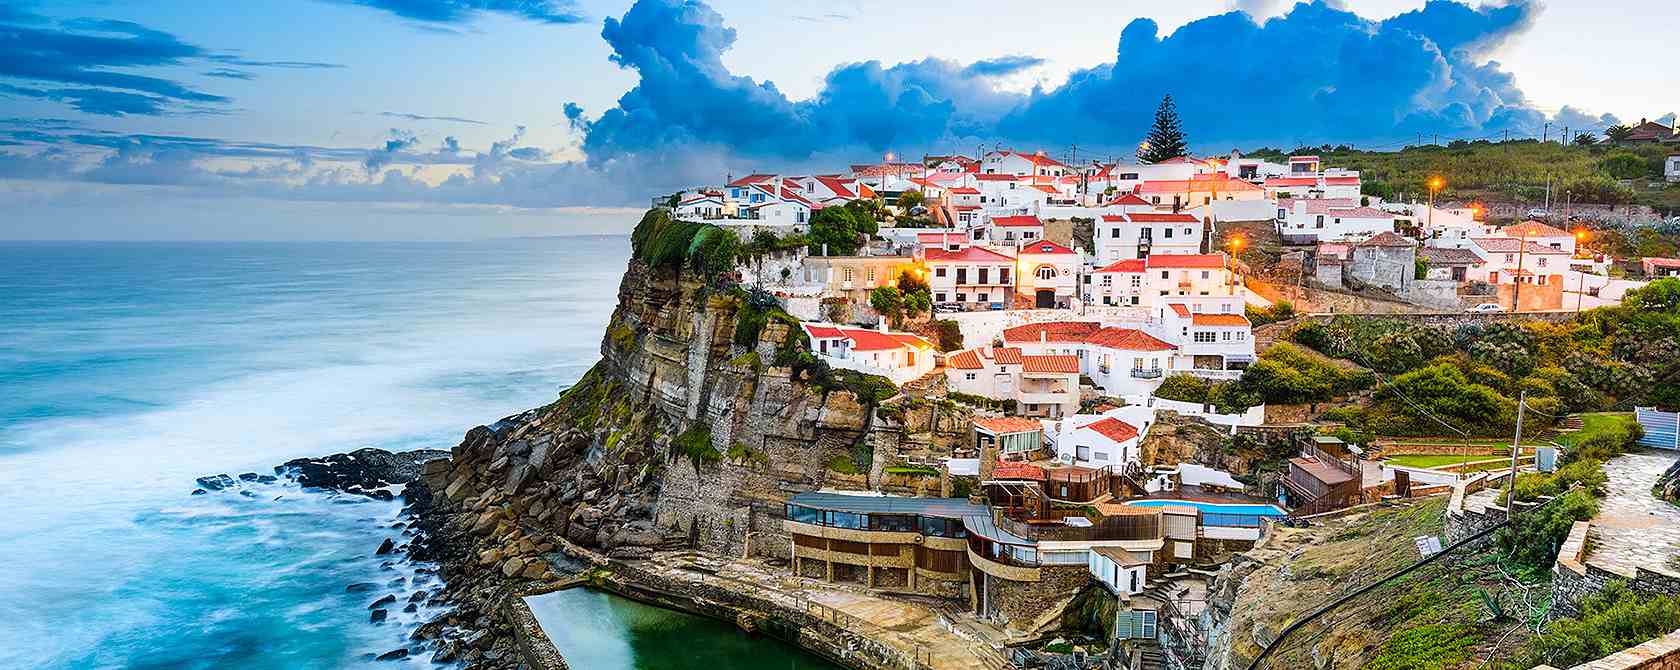 portugal-spain-10-day-featured-image-1680x670